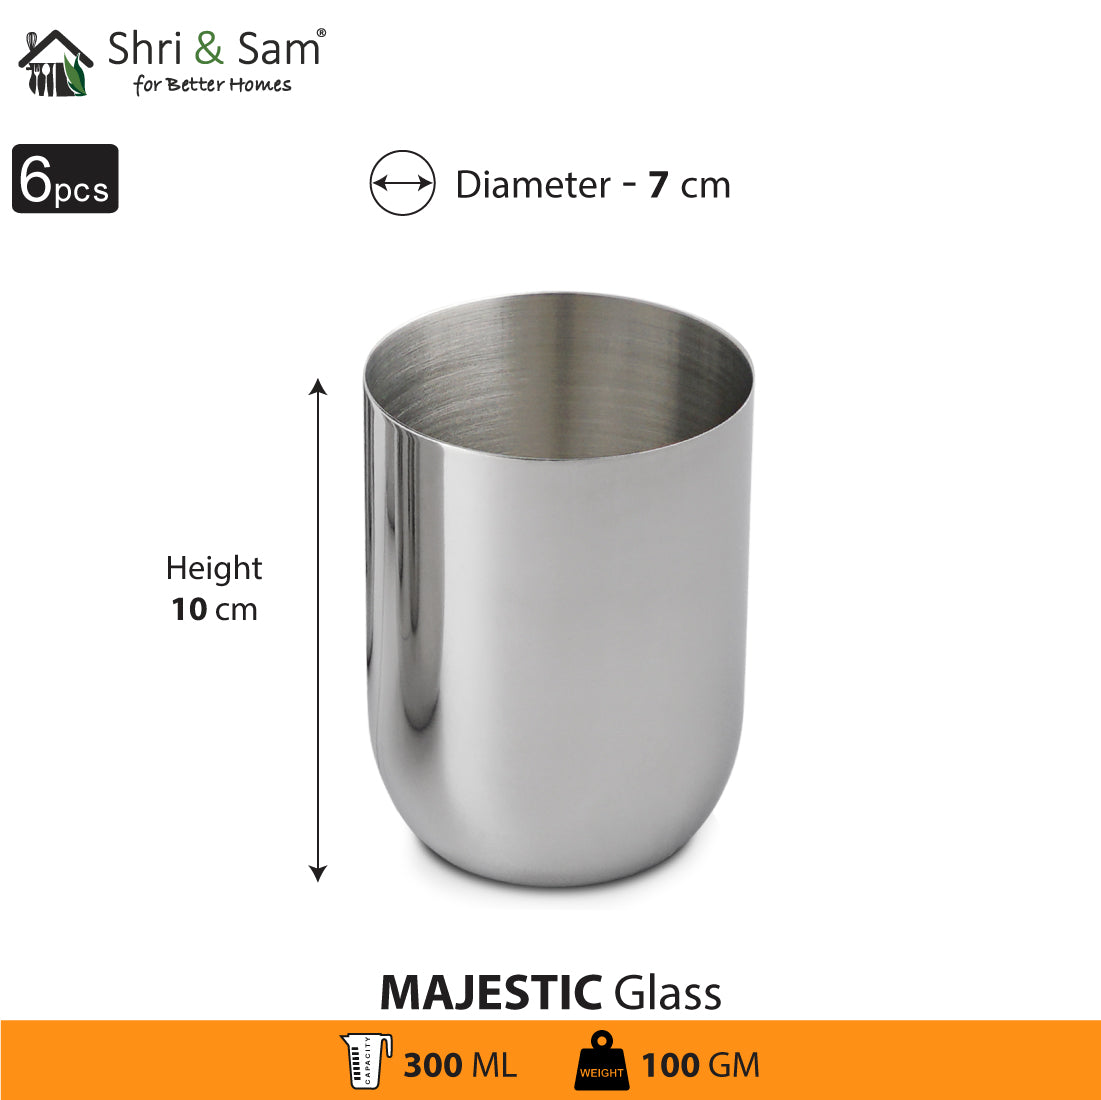 Stainless Steel 6 PCS Glass Majestic